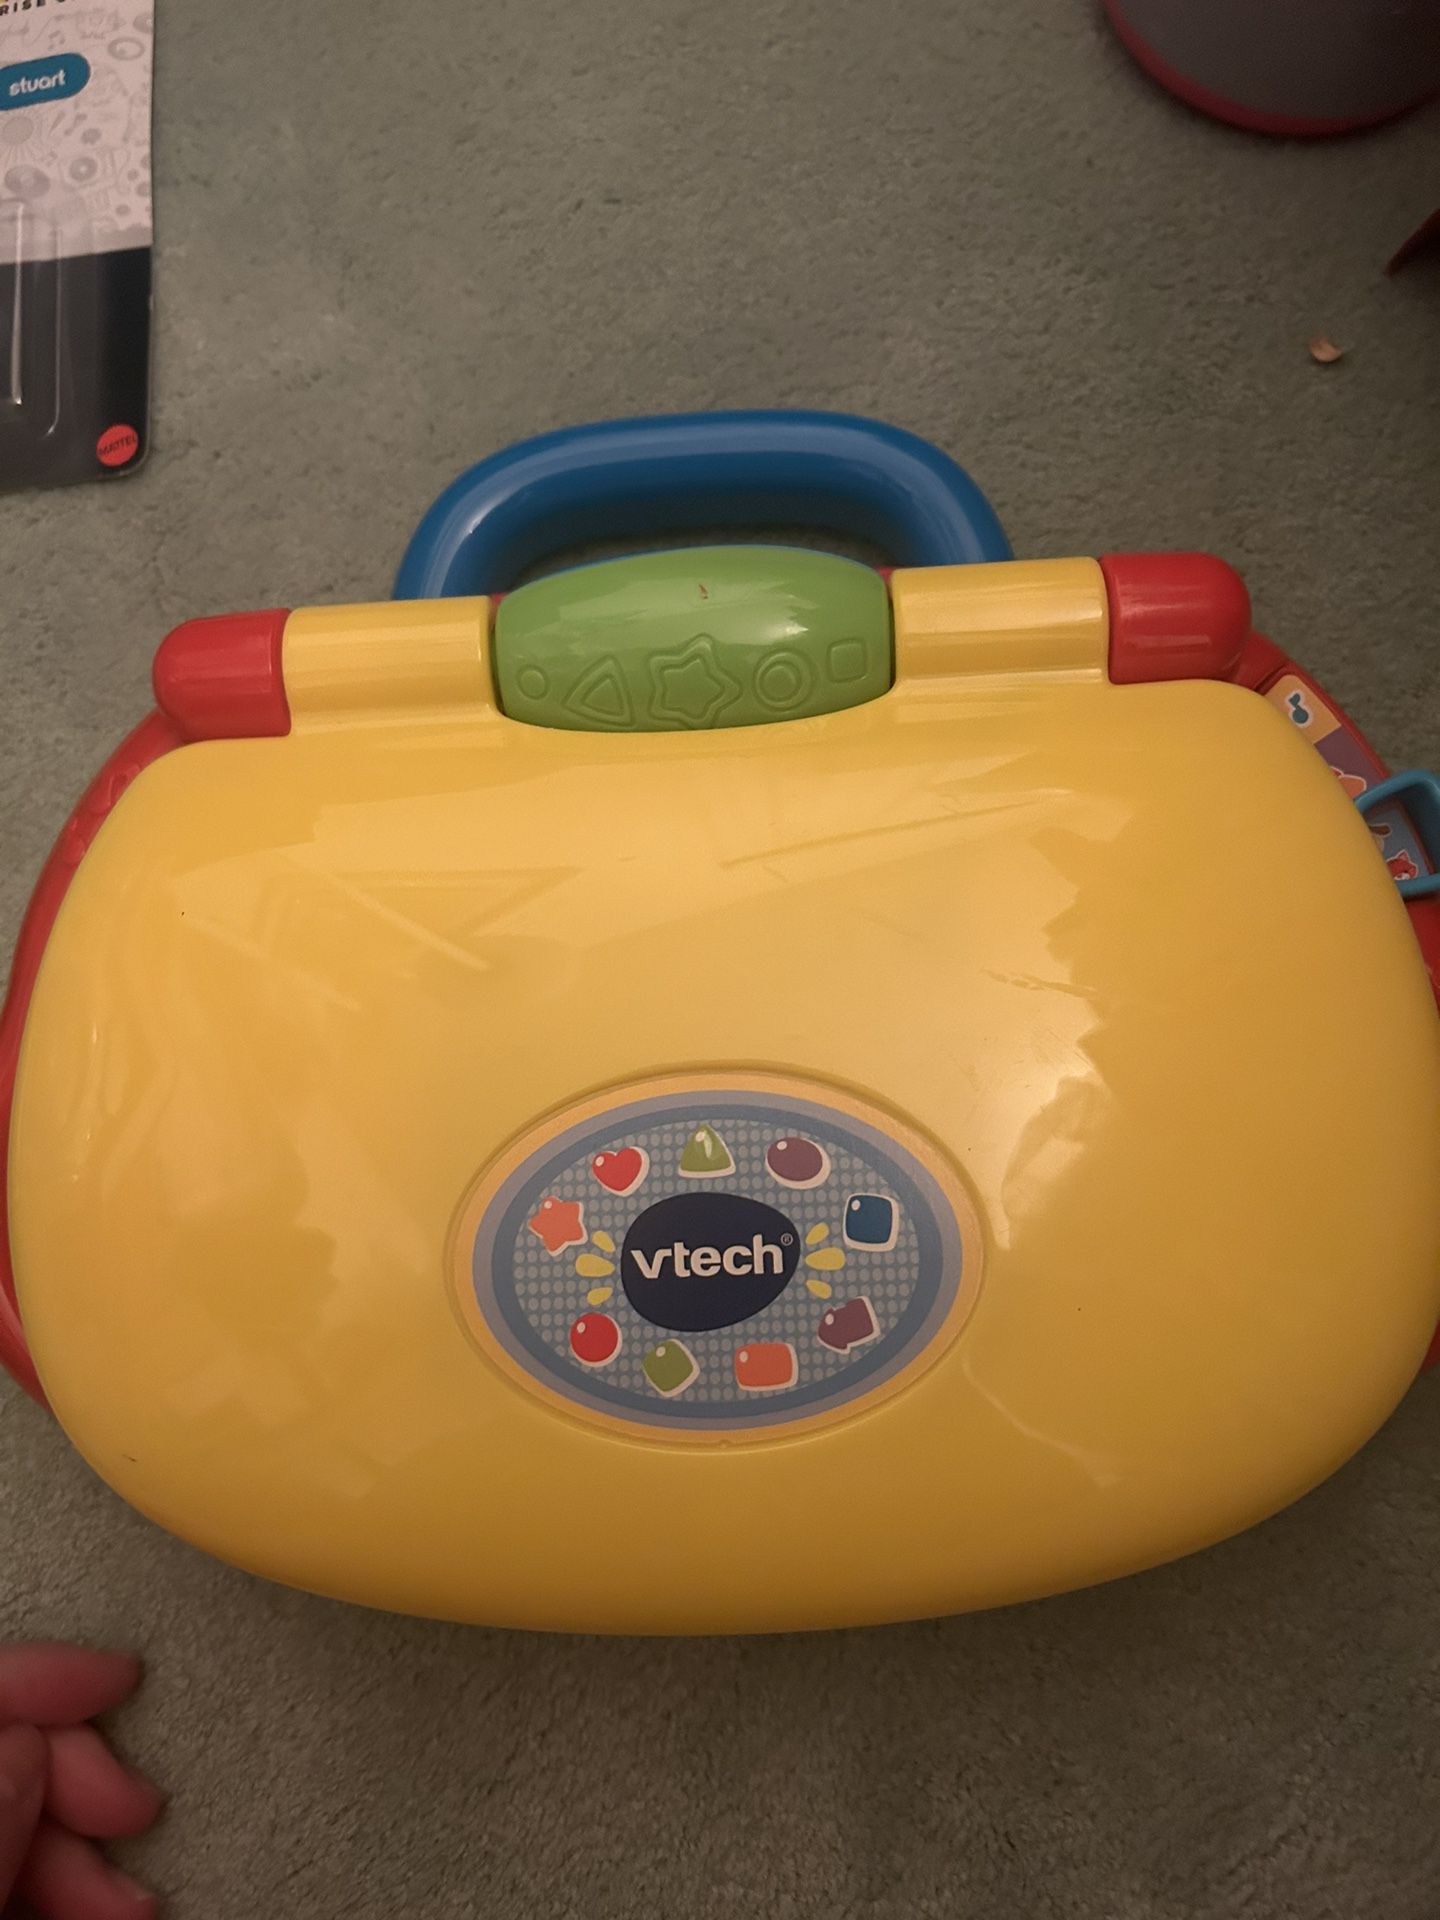 Vtech Laptop For Toddlers